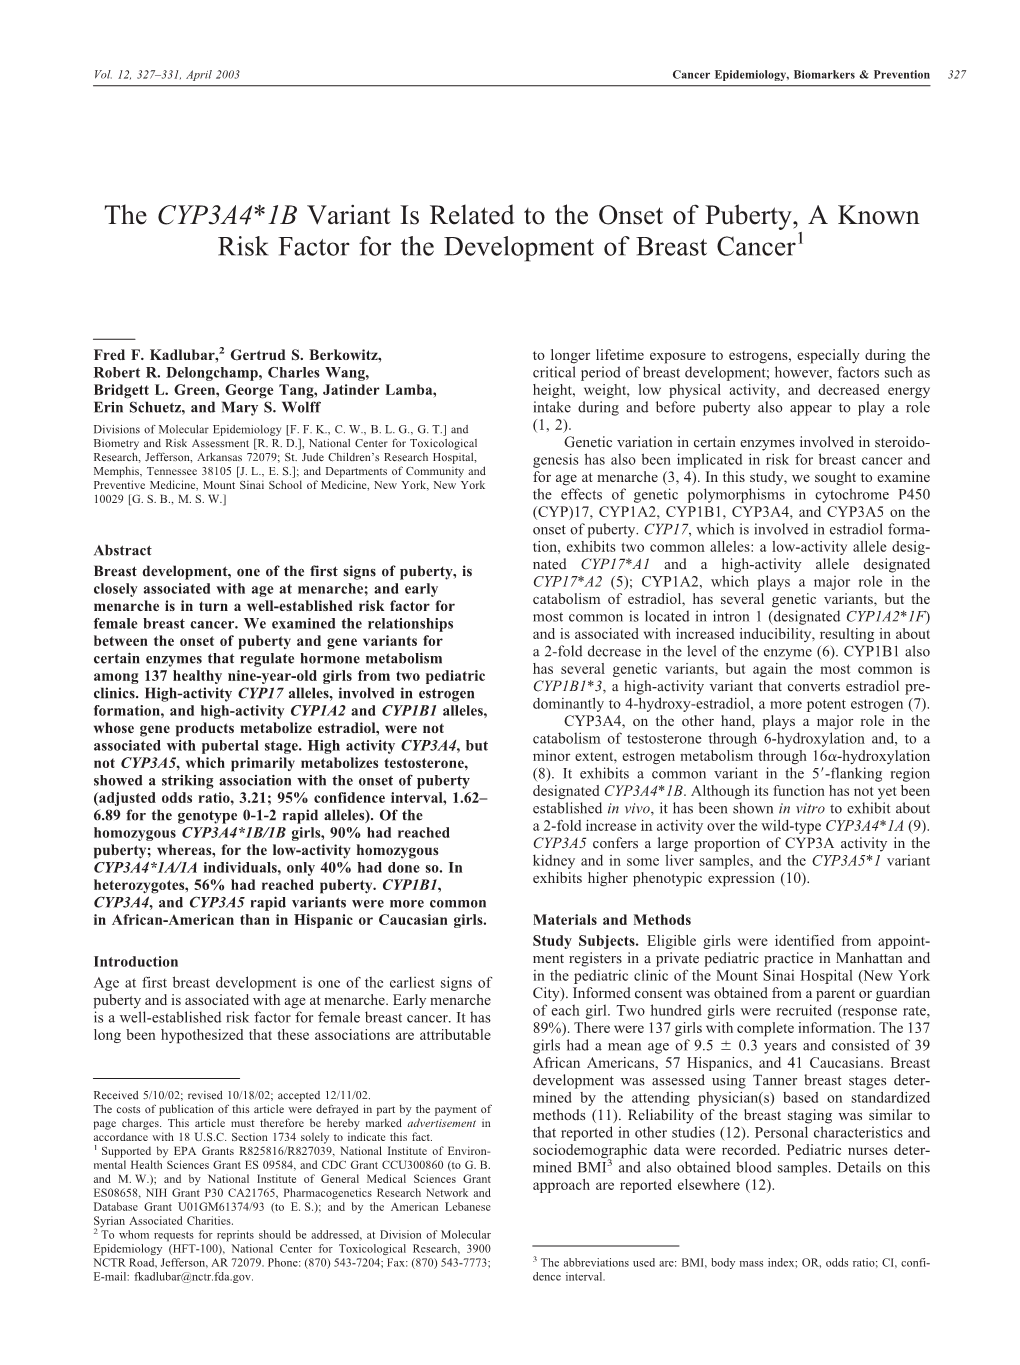 CYP3A4*1B Variant Is Related to the Onset of Puberty, a Known Risk Factor for the Development of Breast Cancer1